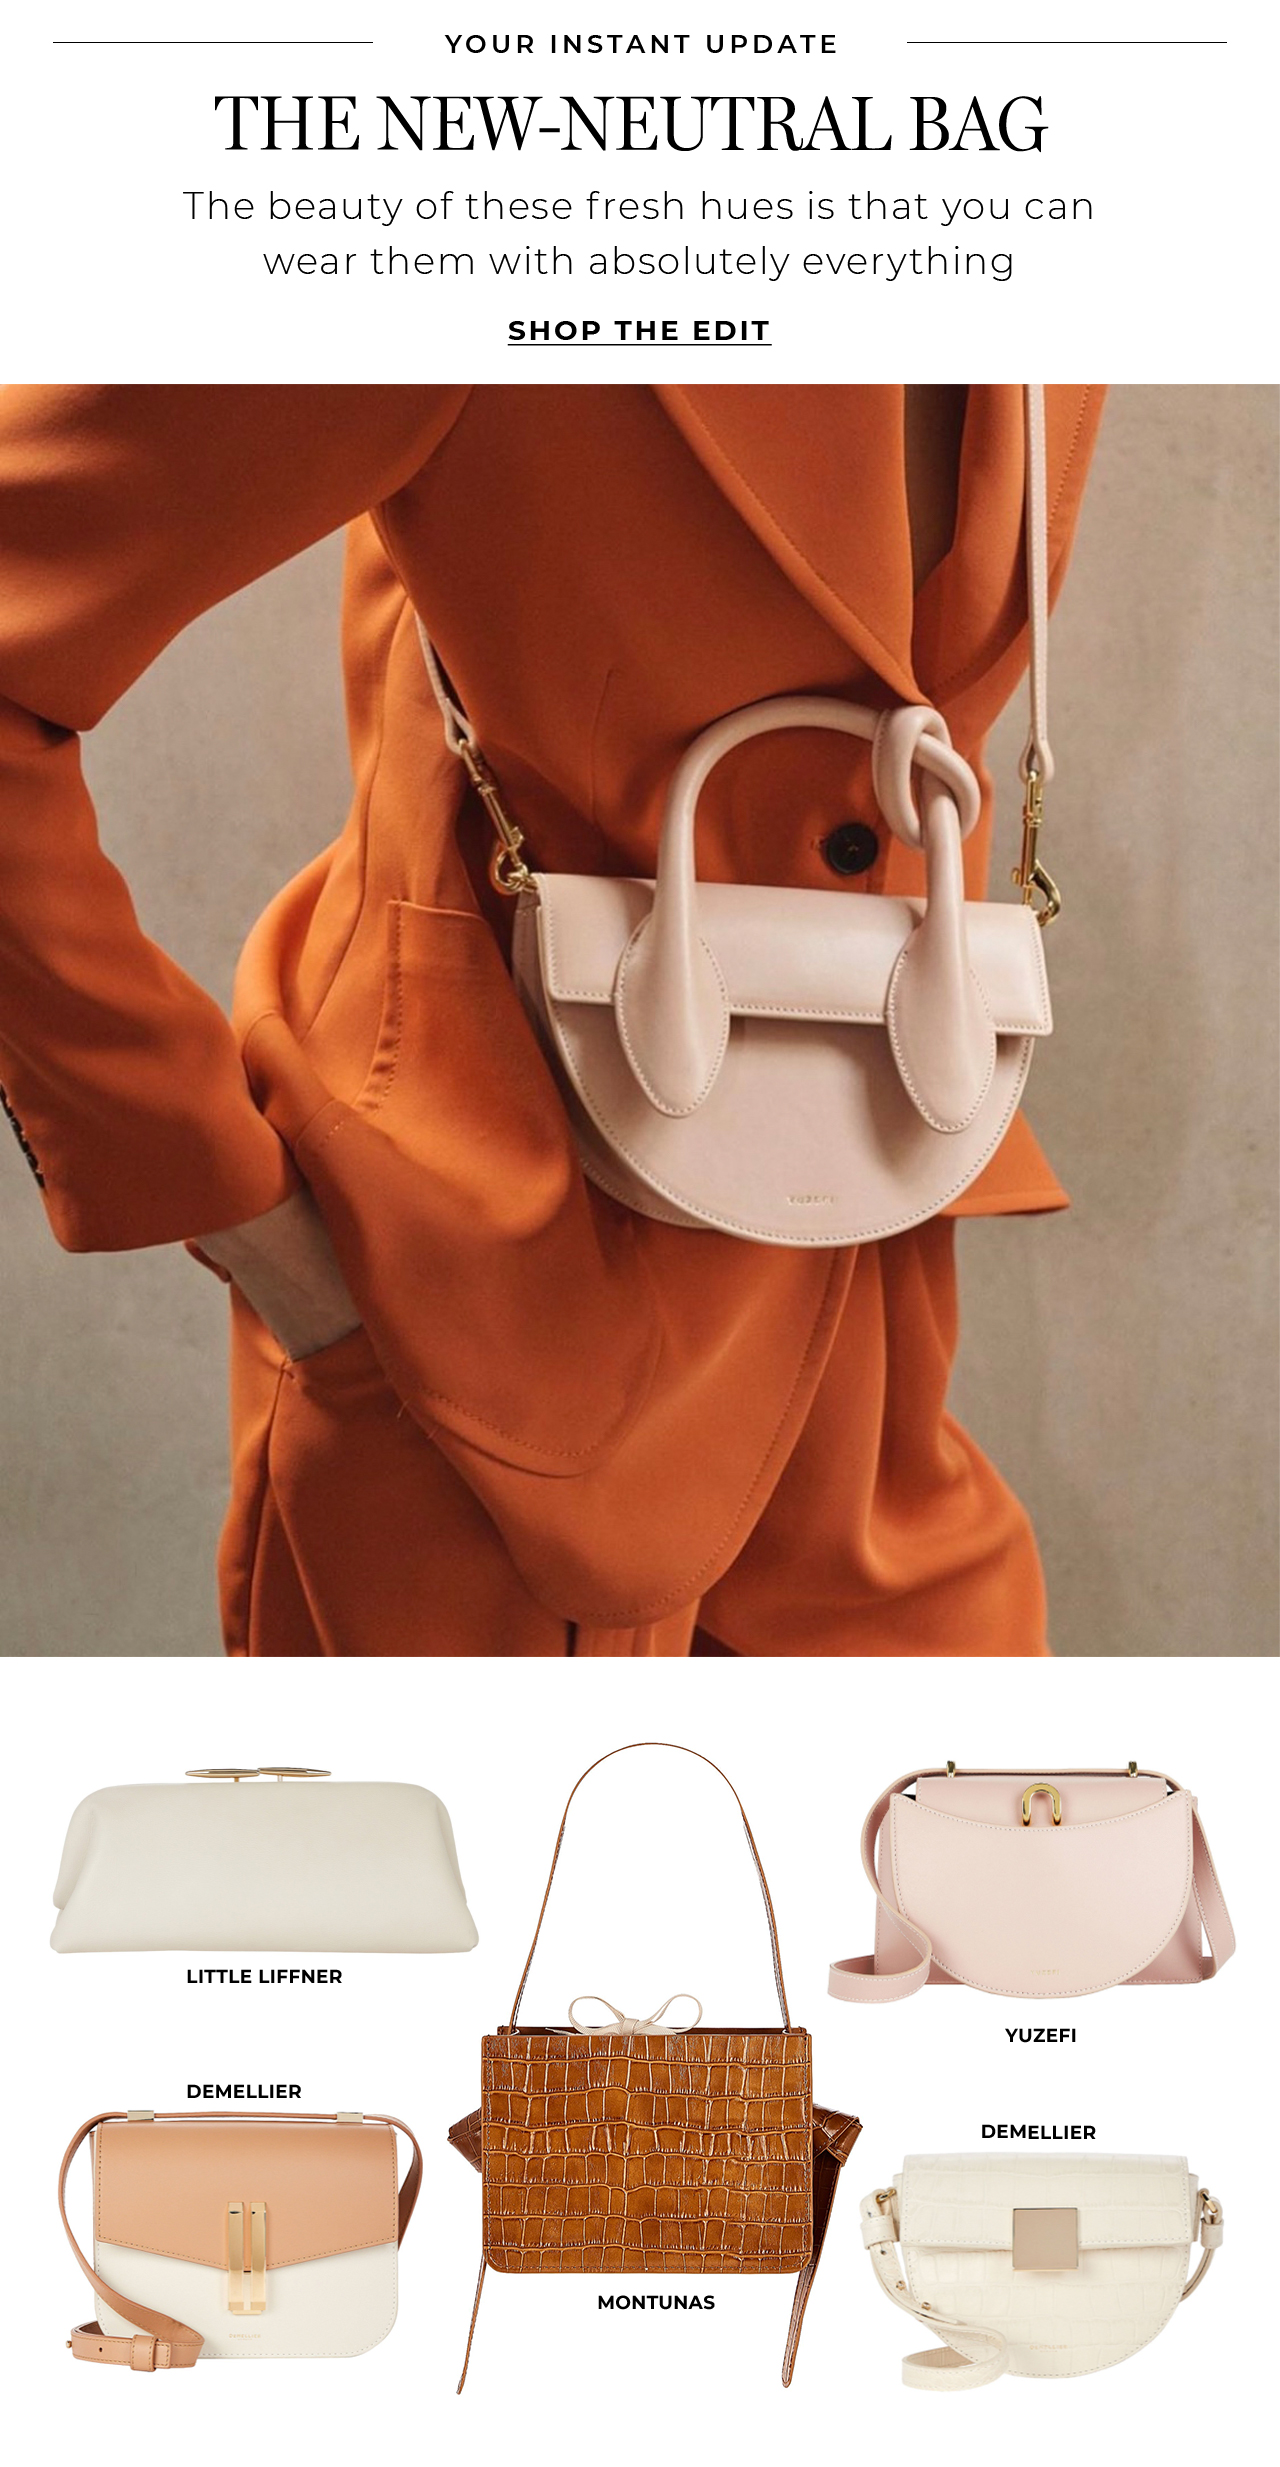 Wear the new neutral bag with absolutely everything